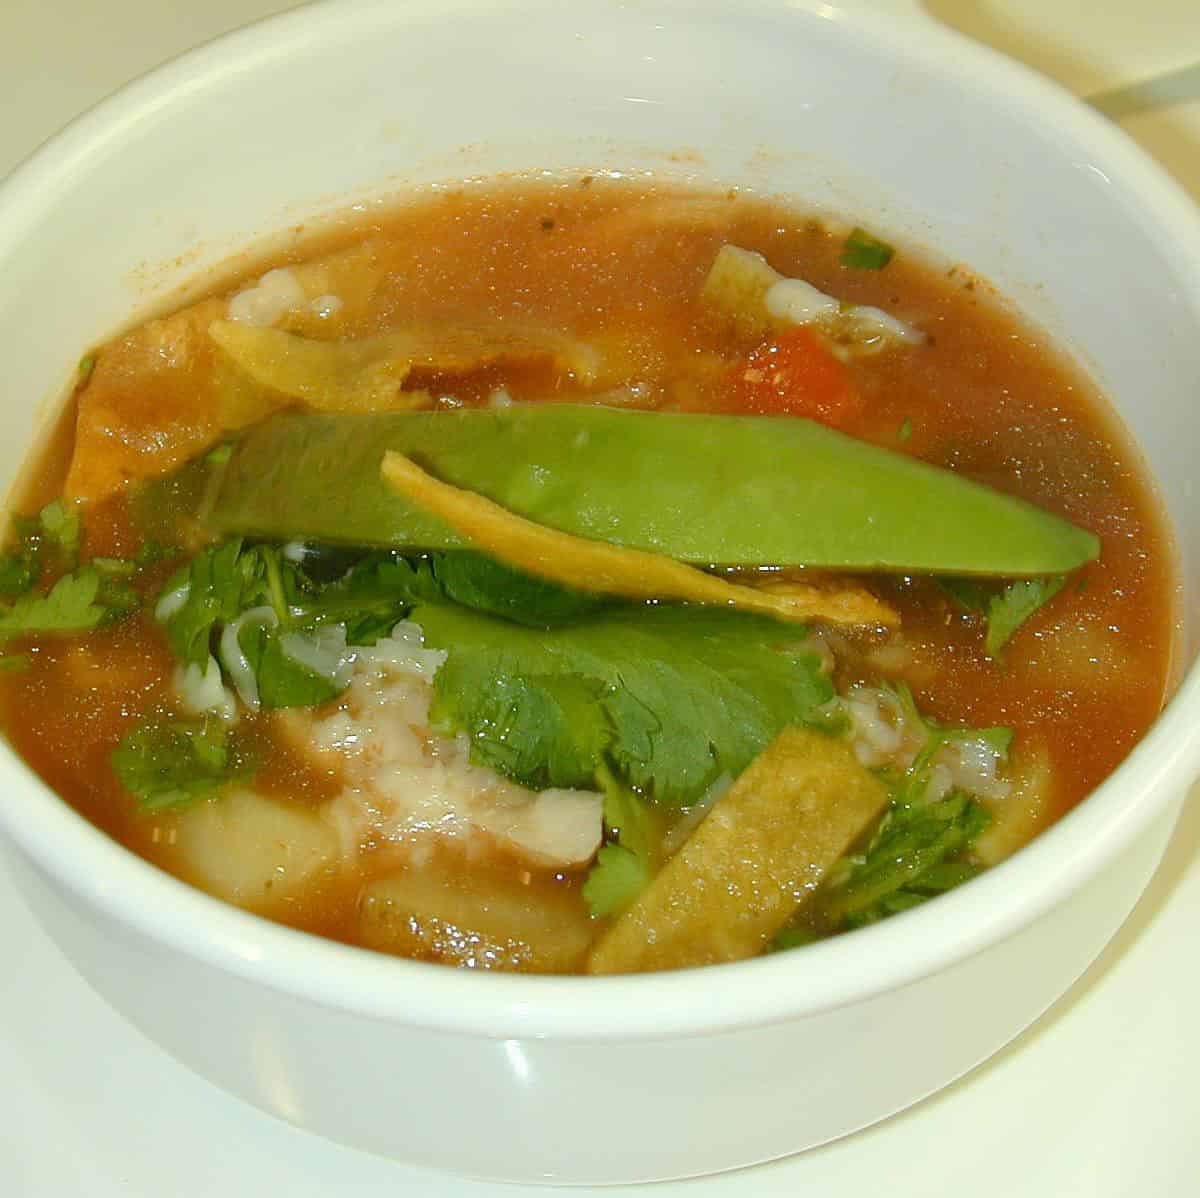  The perfect bowl of comfort on a chilly day: Chicken Tortilla Soup!